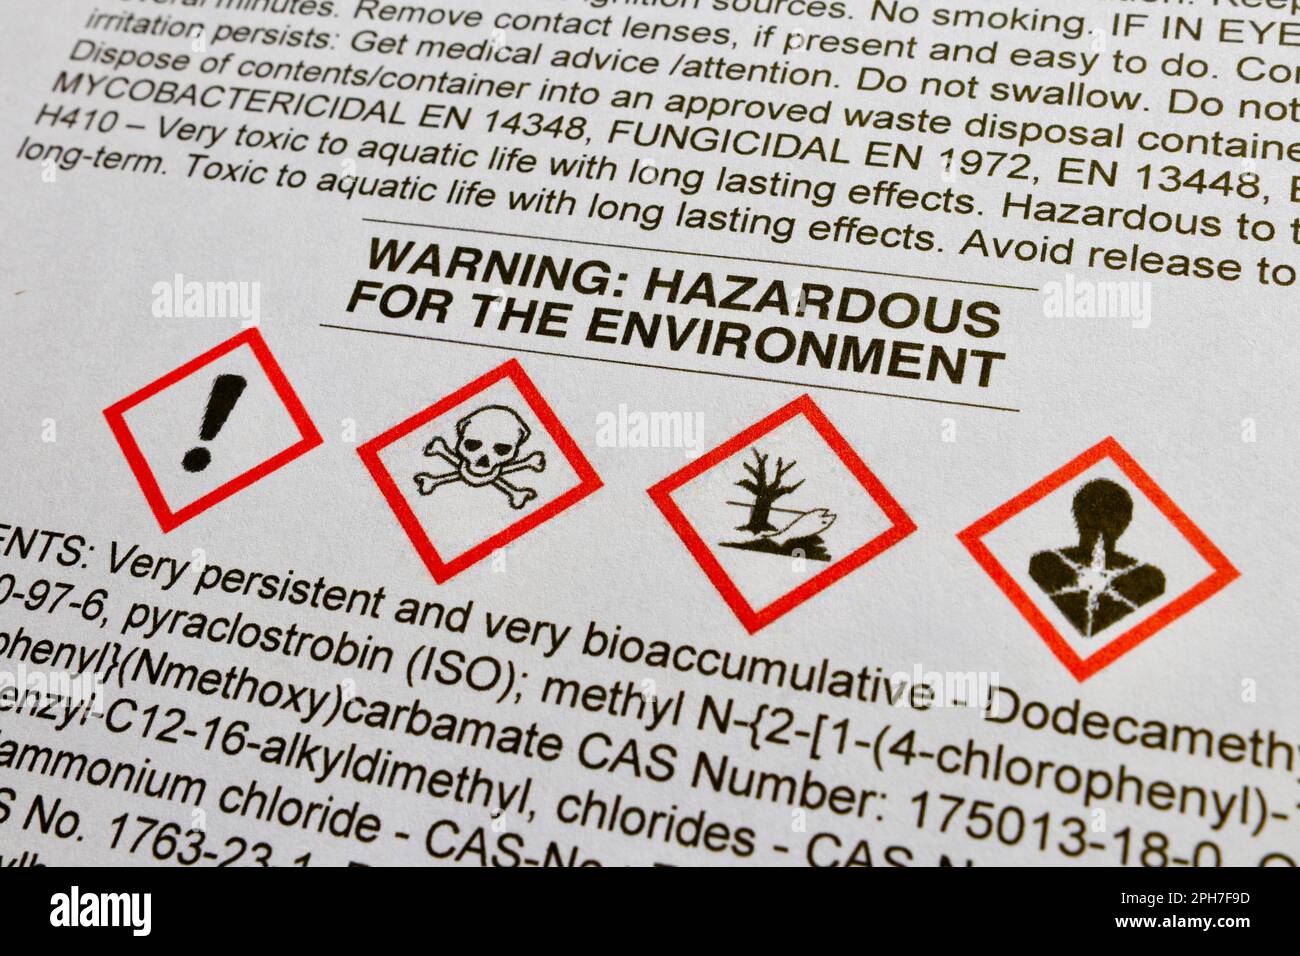 Warning on a Safety Data Sheet indicating that the product contains substances hazardous to the environment. Standard chemical hazard pictograms shown Stock Photo